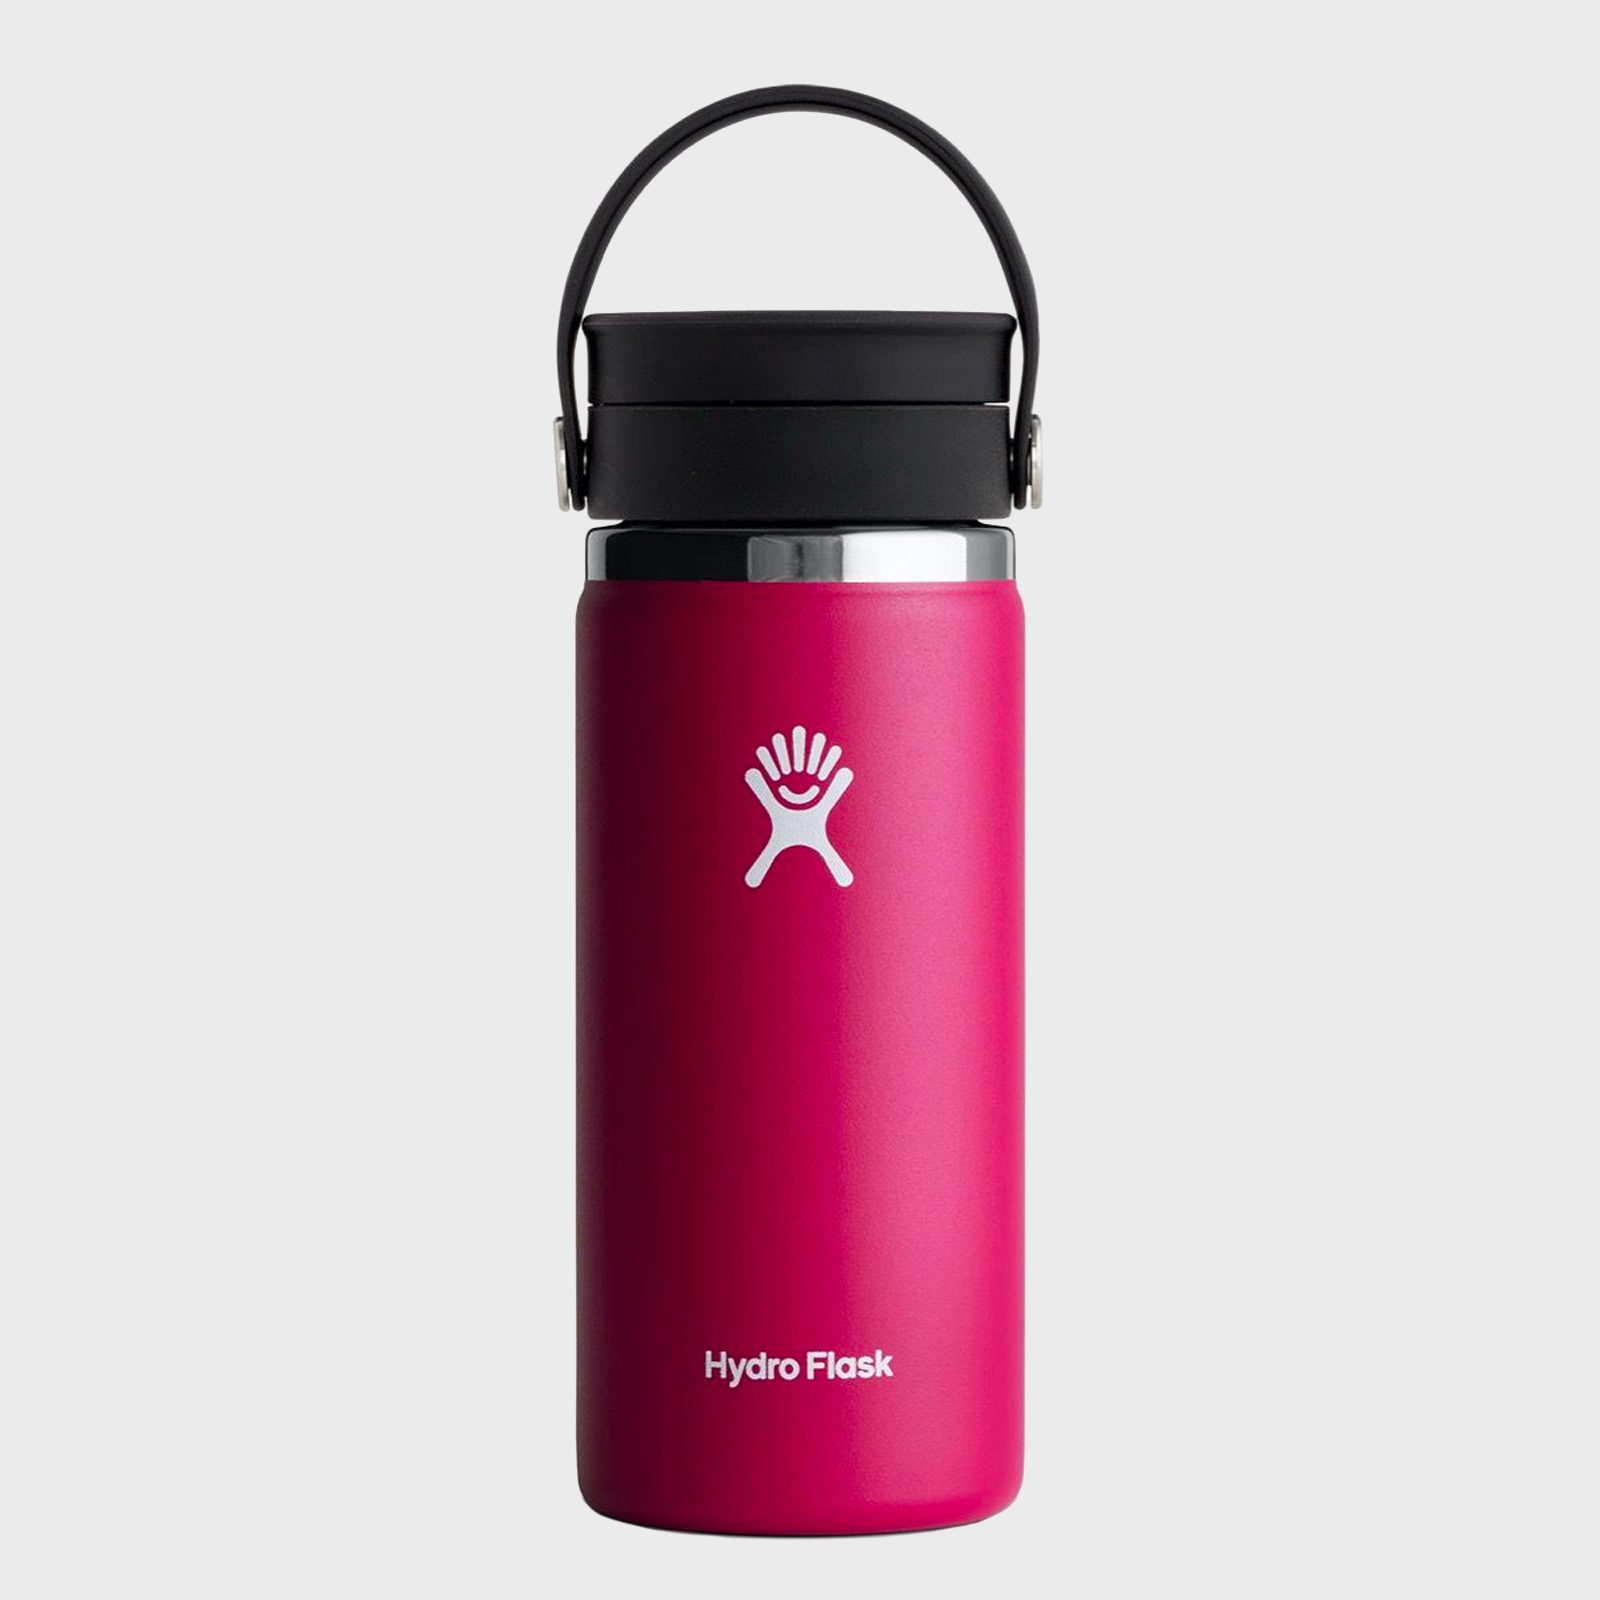 https://www.rd.com/wp-content/uploads/2022/05/RD-15-Best-Reusable-Coffee-Cups-Ecomm-Hydro-Flask.jpg?fit=700%2C700